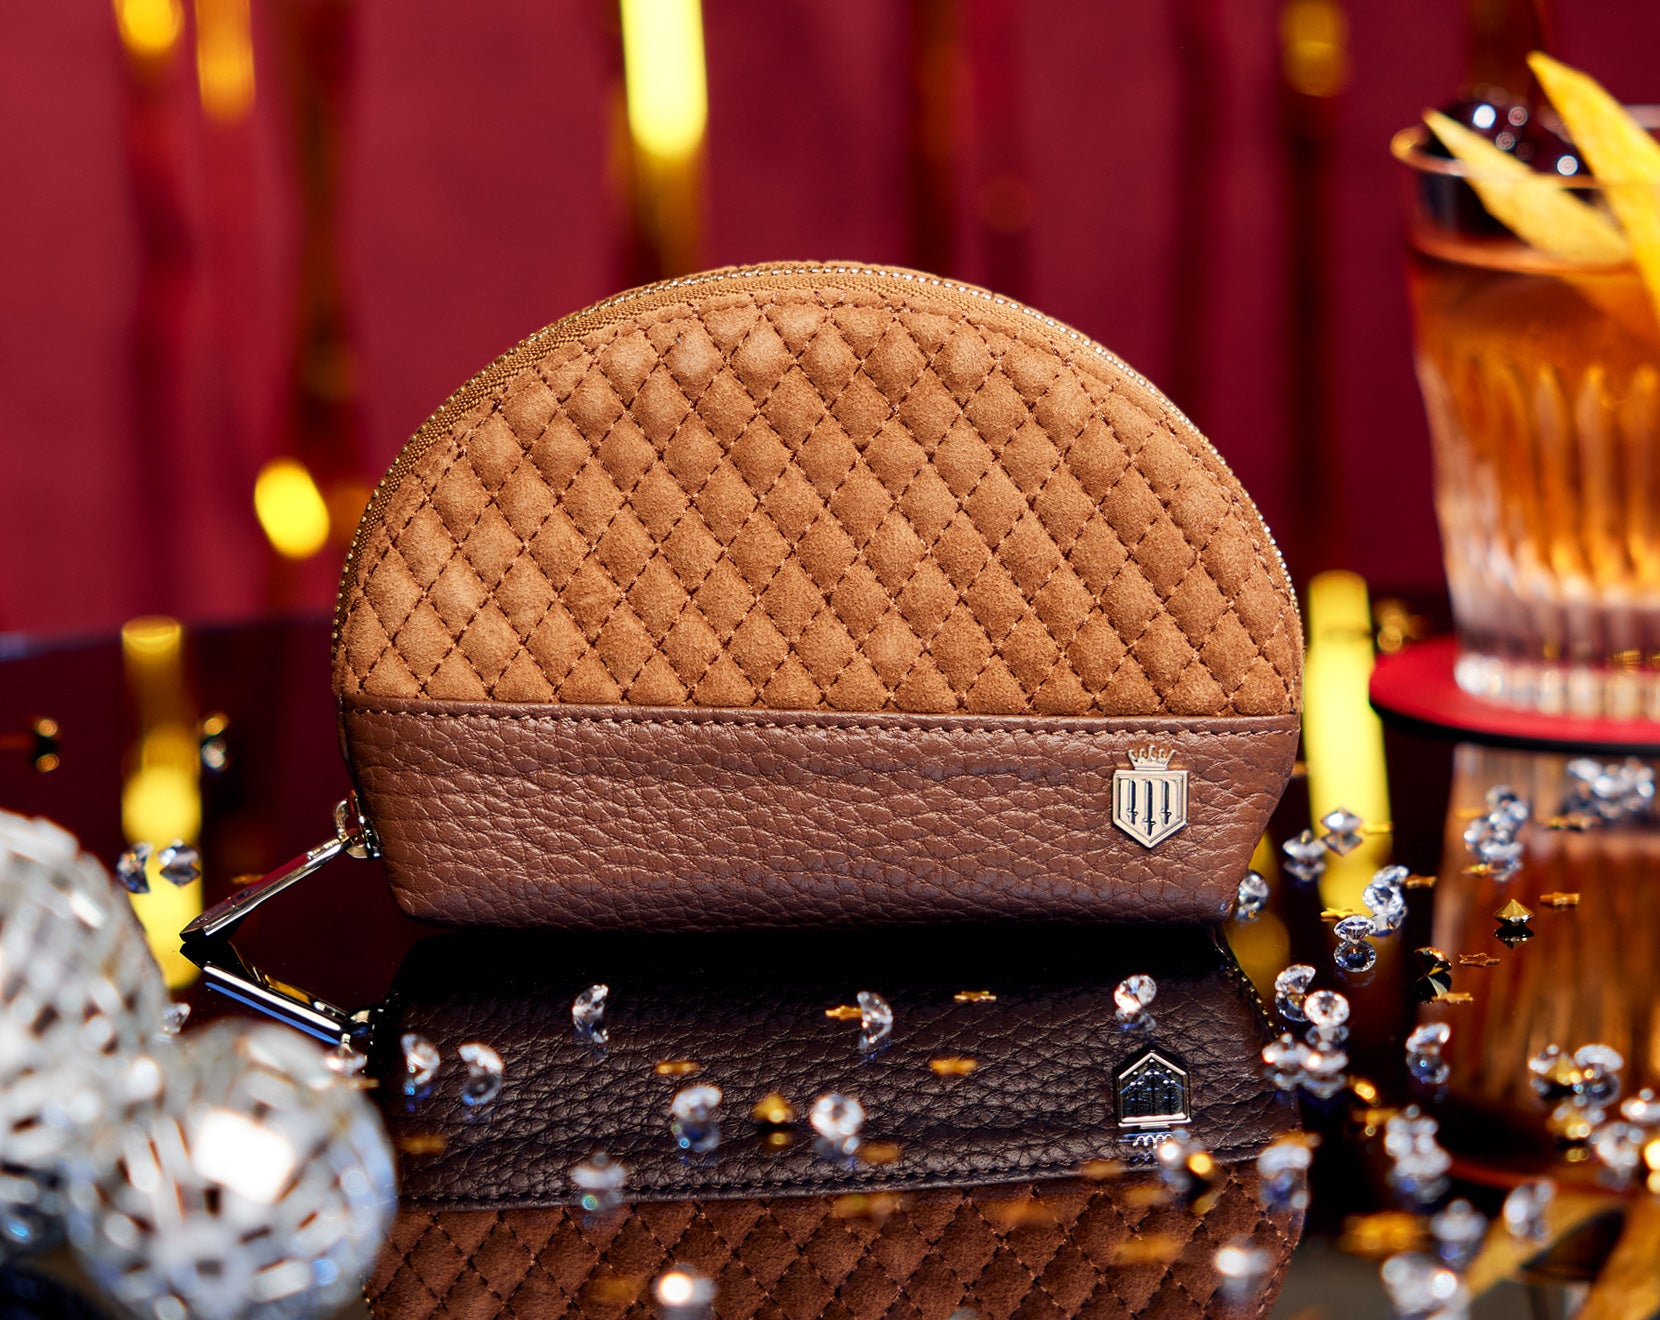 The chiltern coin purse on a table covered with diamonds in a festive setting.